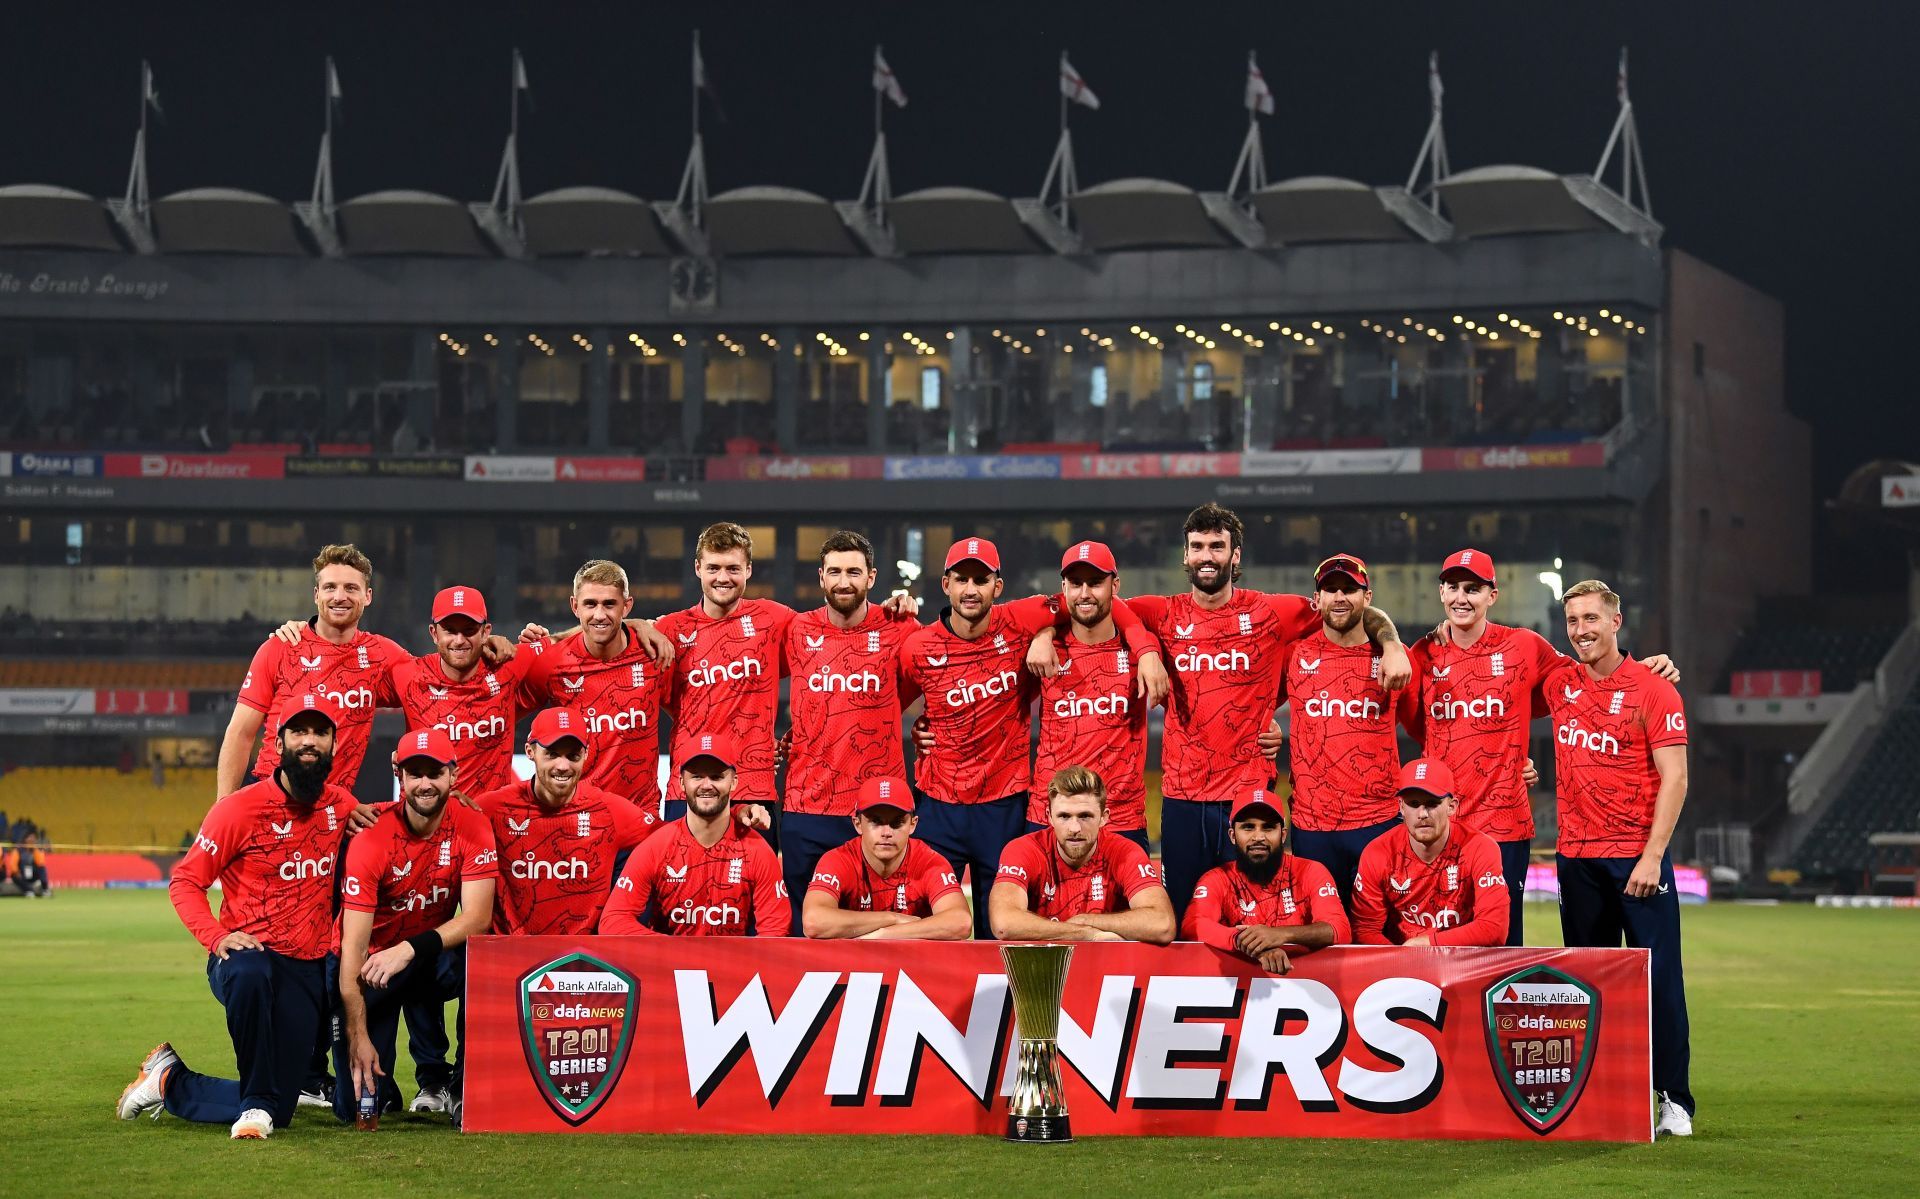 England won a closely -fought series. 